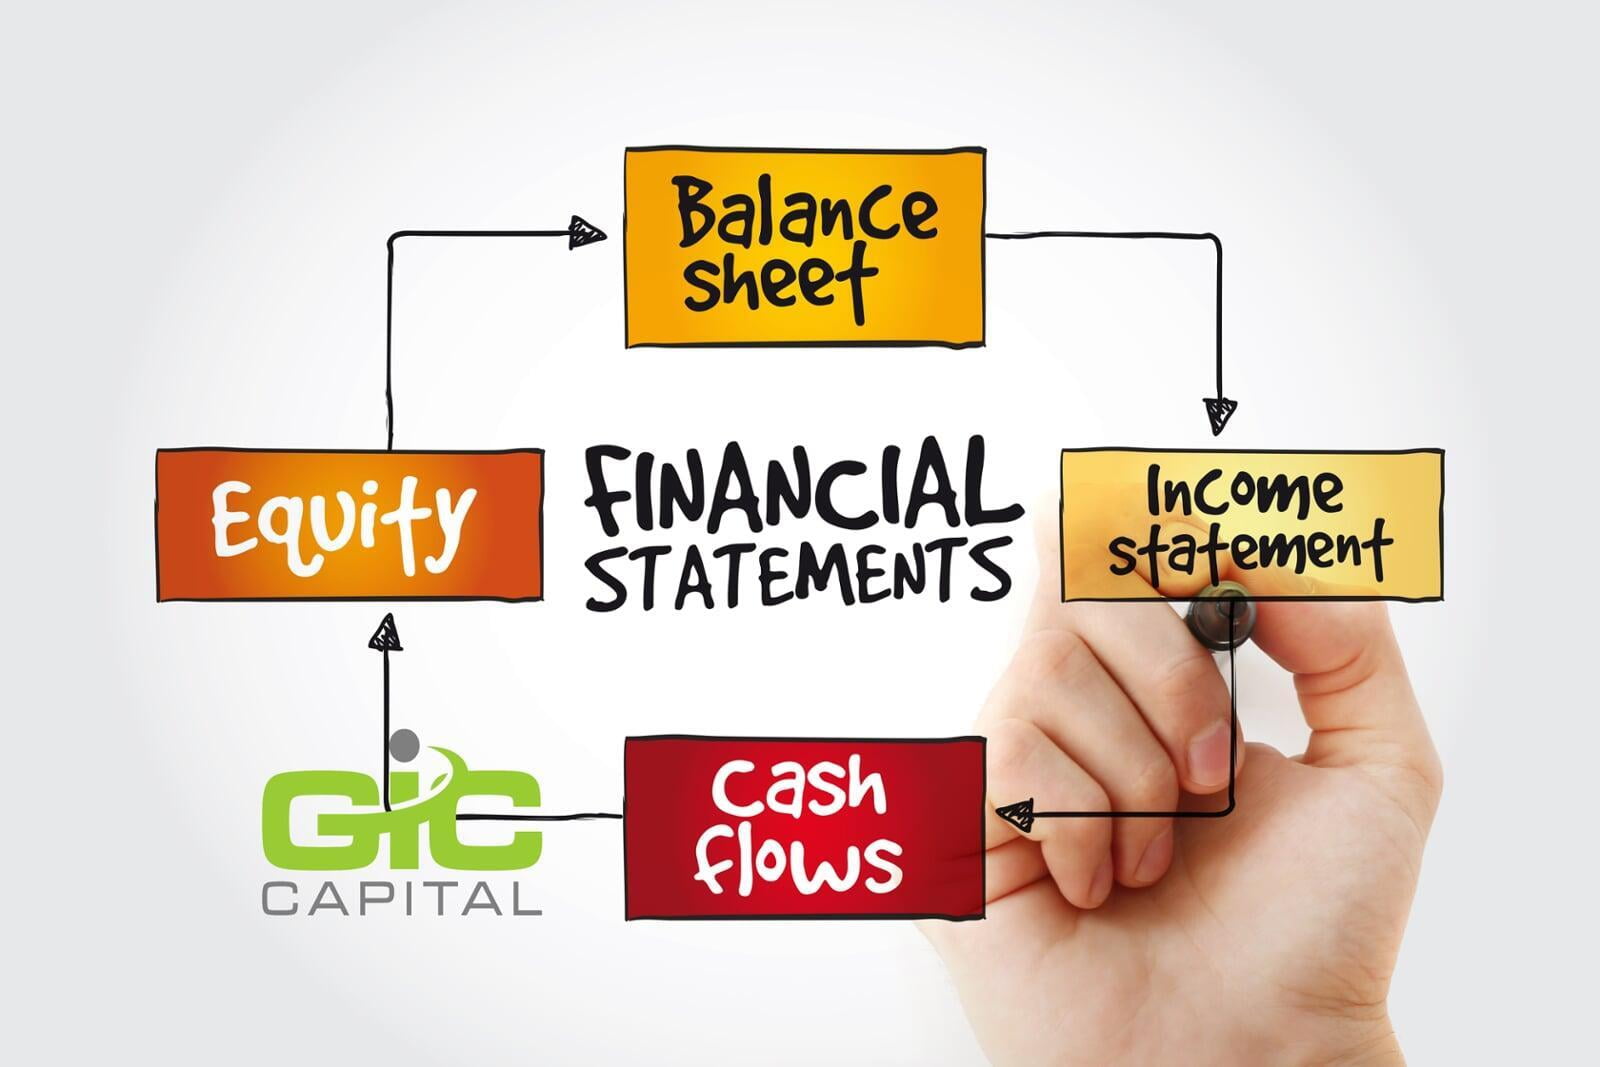 Financial statements—what they are and why you need them